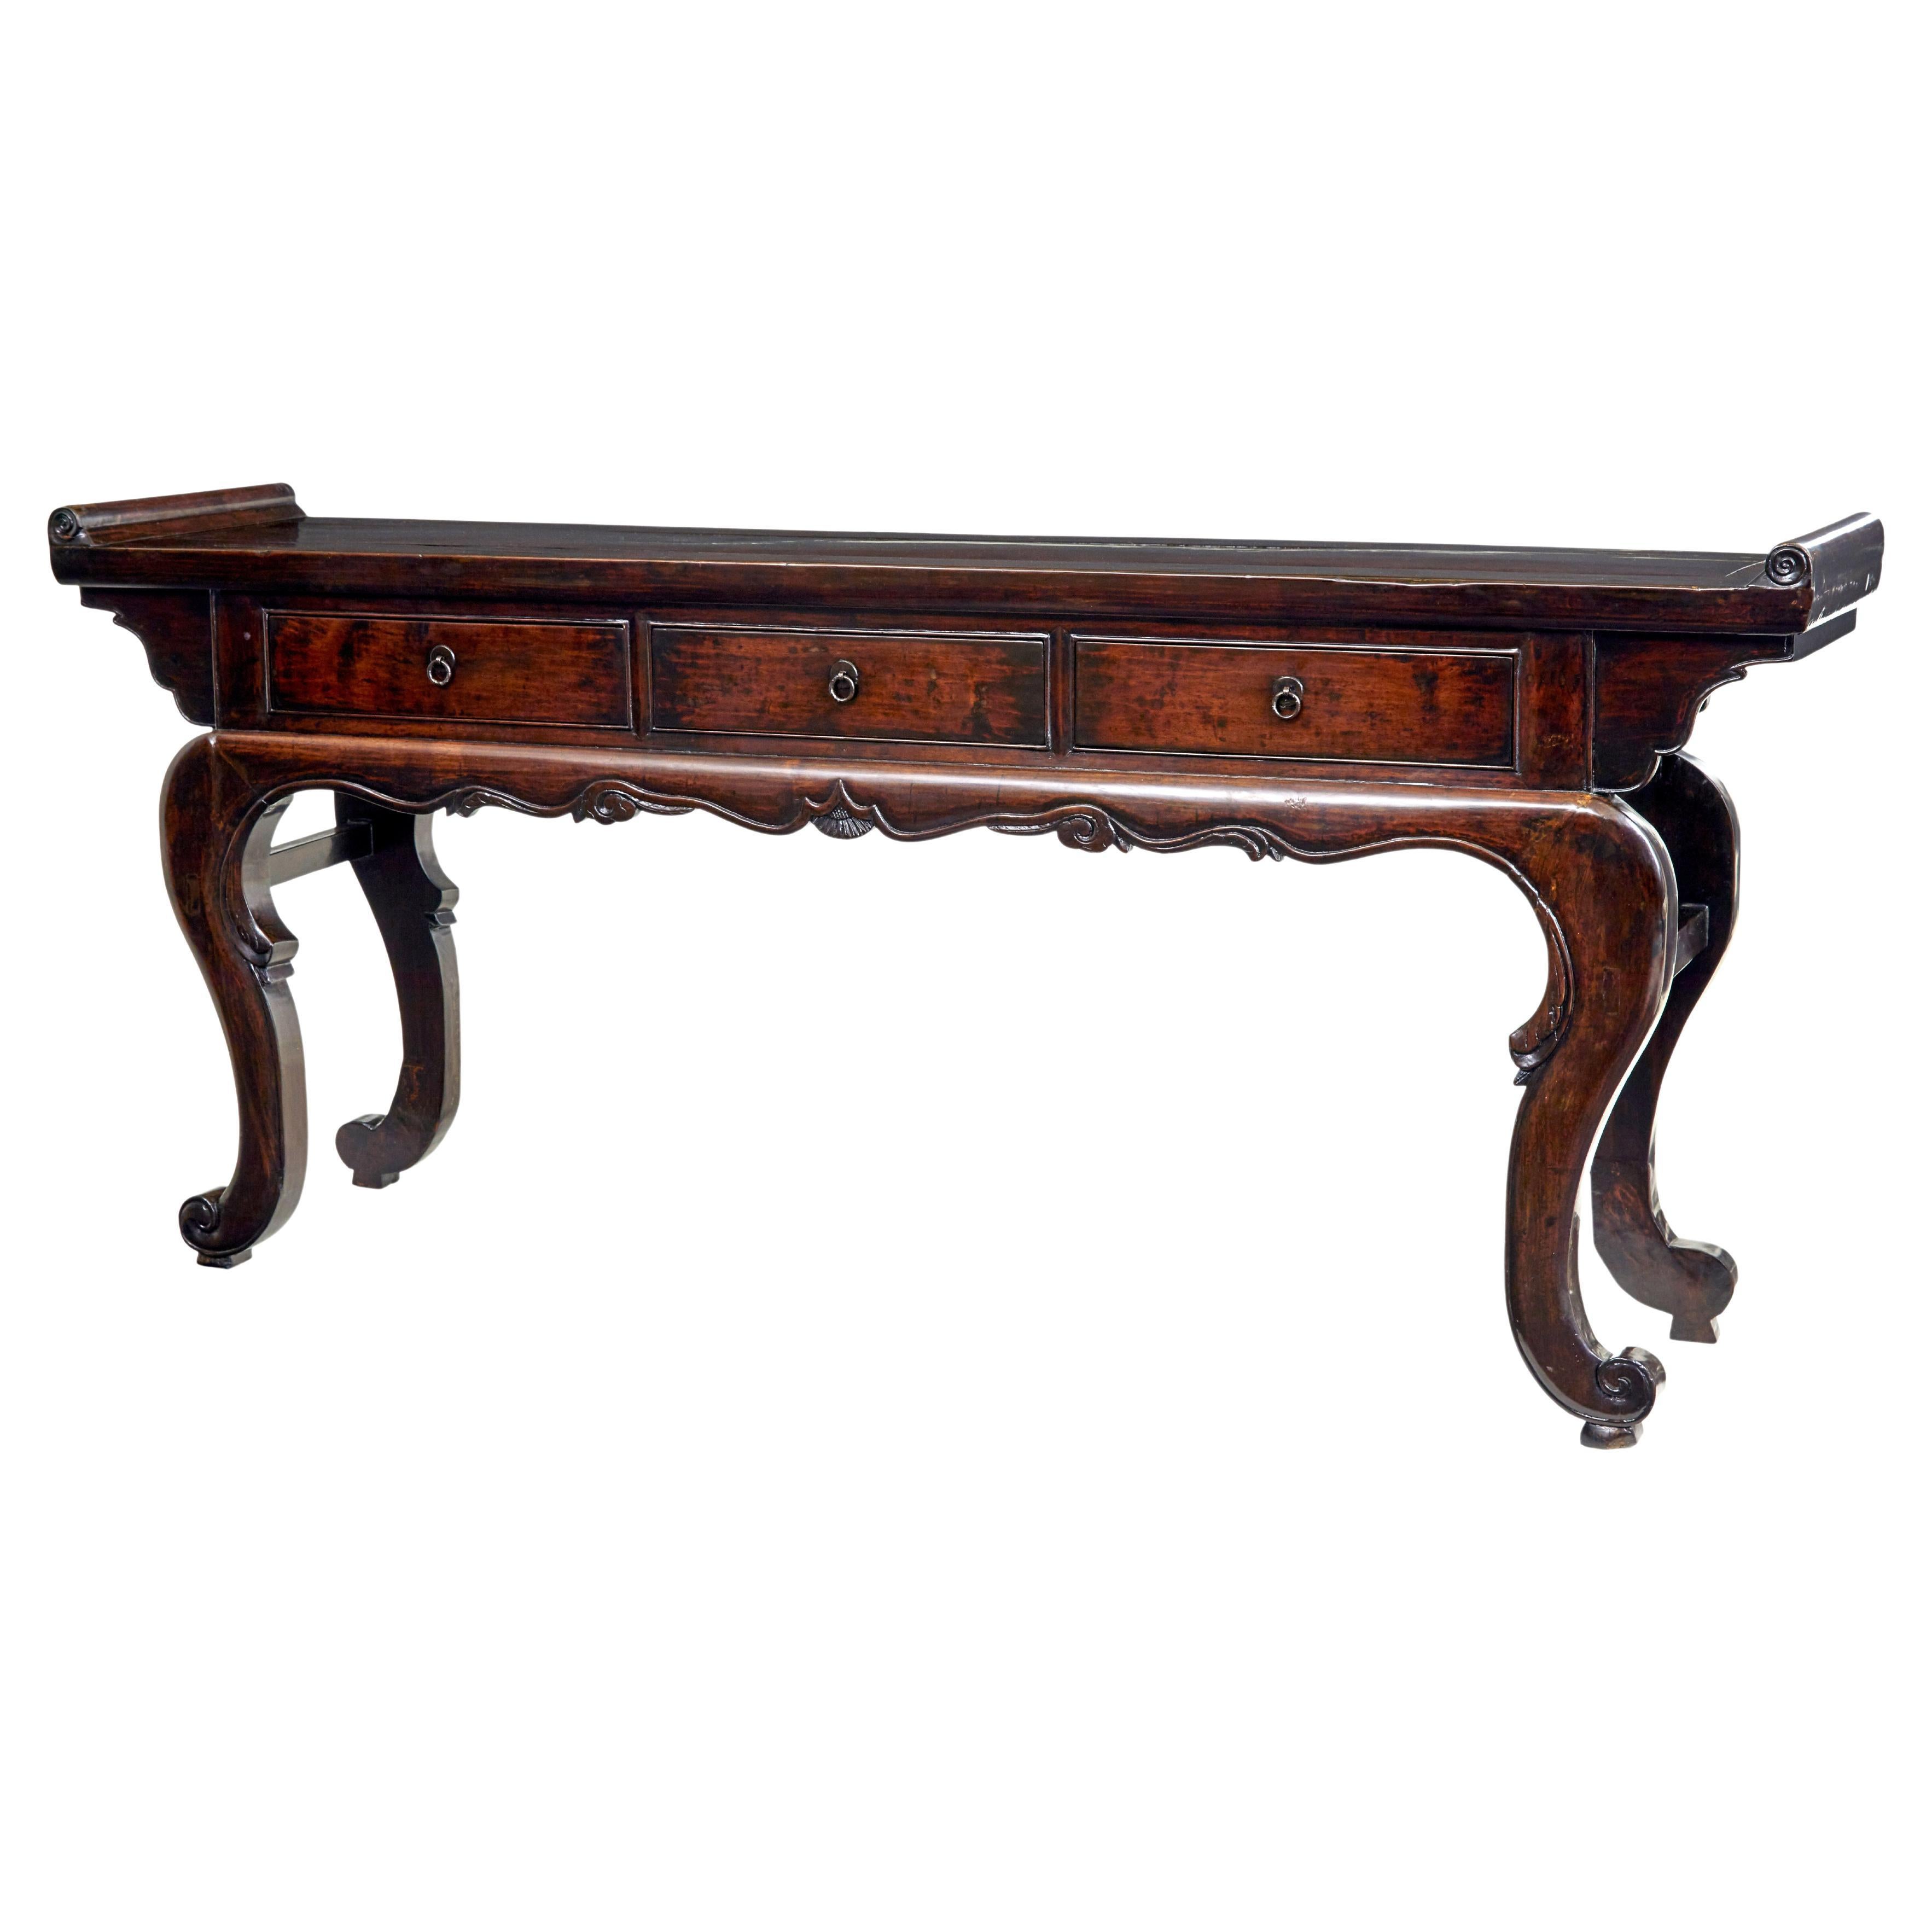 19th century Chinese lacquered hardwood sideboard For Sale